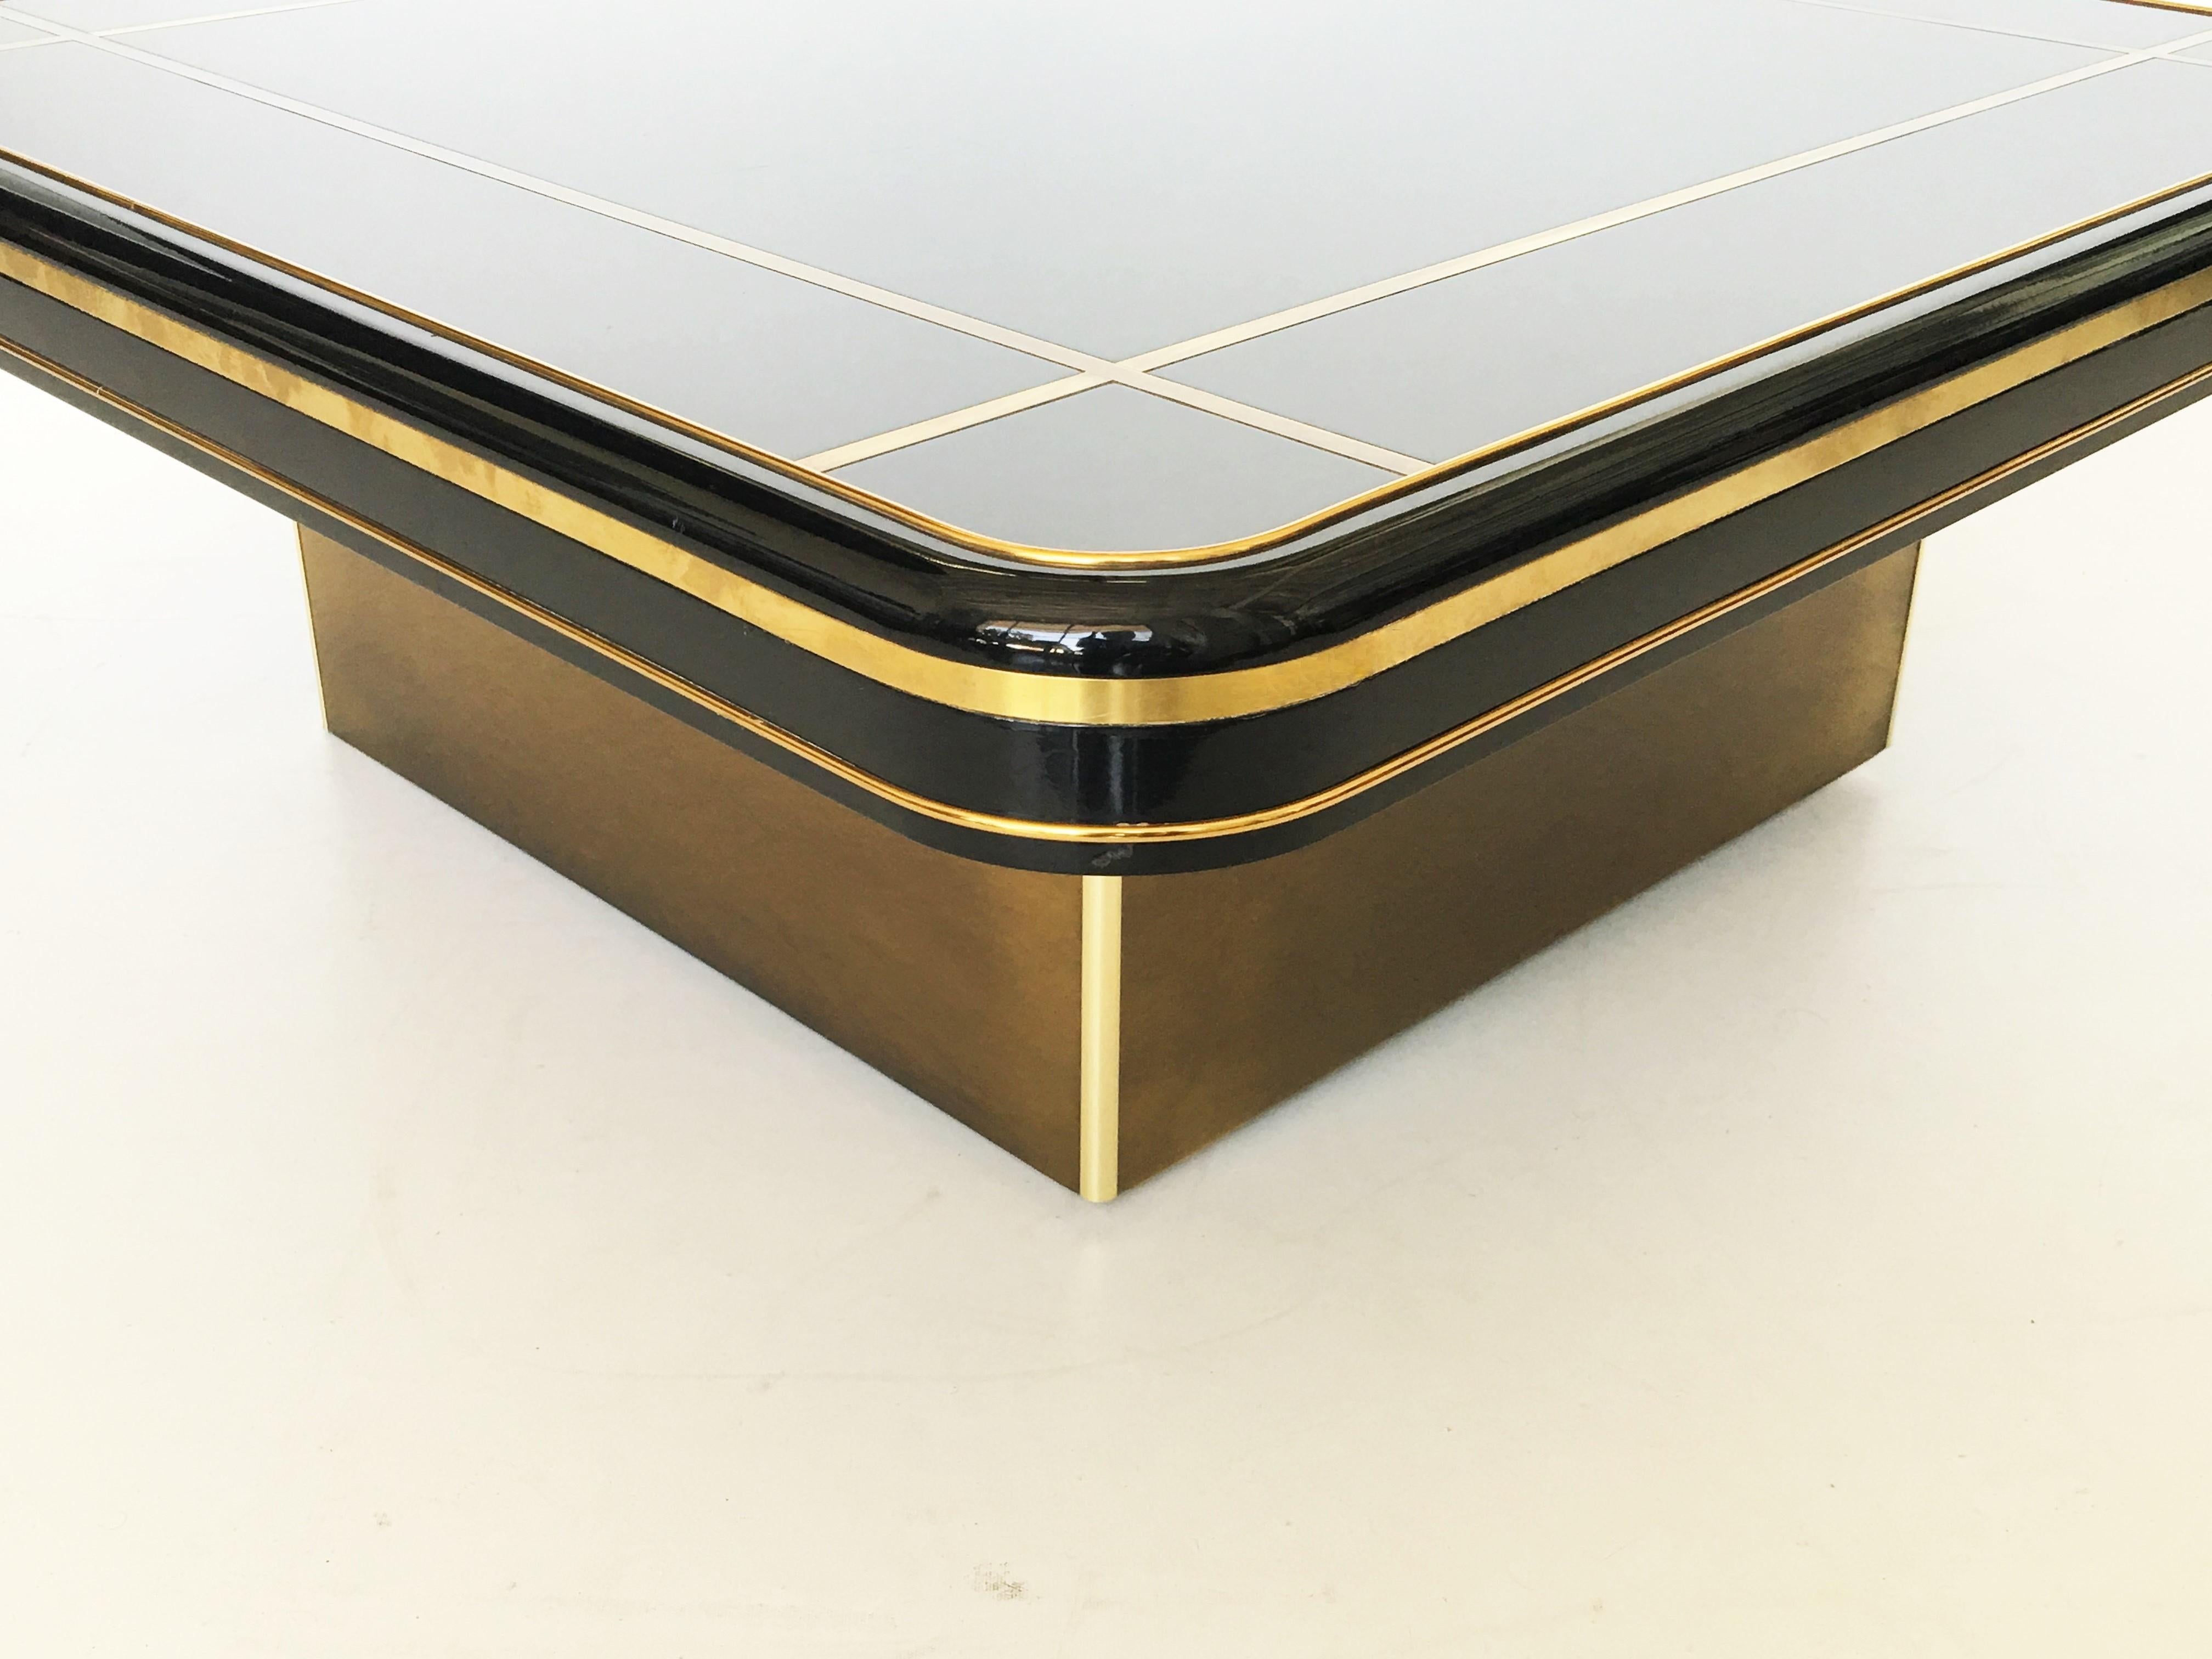 Mastercraft coffee table featuring a brass platform base supports a square top black lacquered surface with decorative brass inset and banding, with beautiful patina.